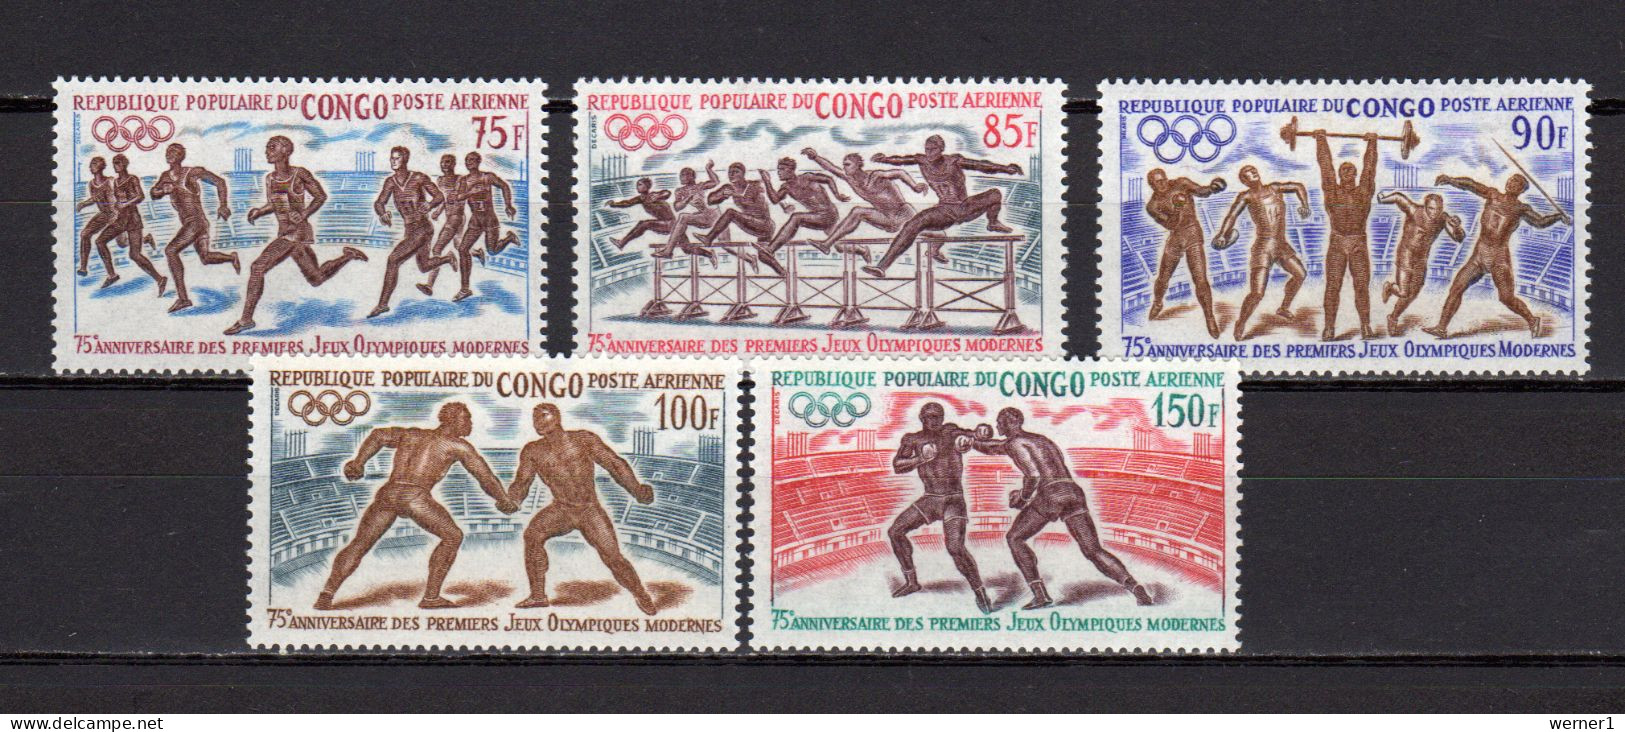 Congo 1971 Olympic Games, 75th Anniv. Of Olympic Games, Boxing, Weightlifting Etc. Set Of 5 MNH - Ete 1972: Munich